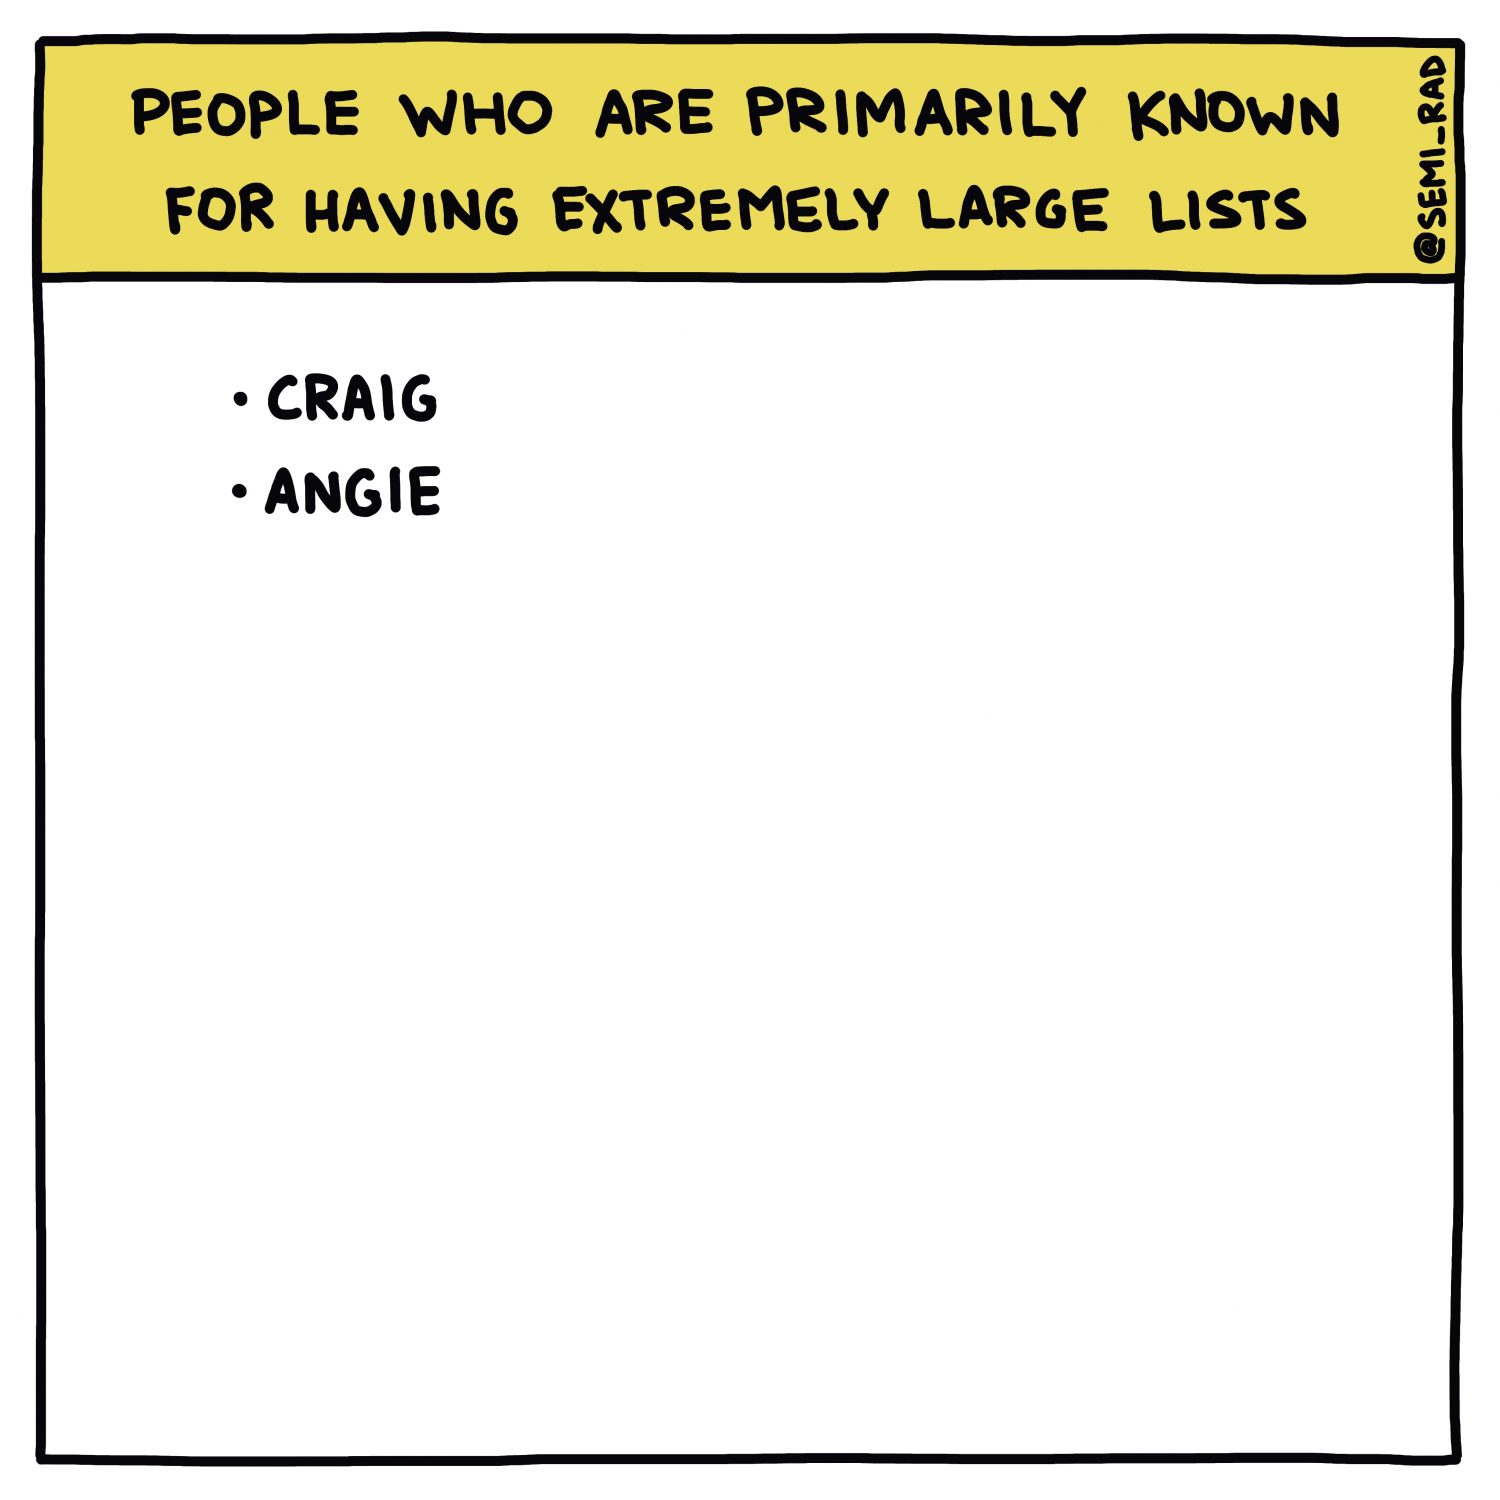 semi-rad chart: People Who Are Primarily Known For Having Extremely Large Lists